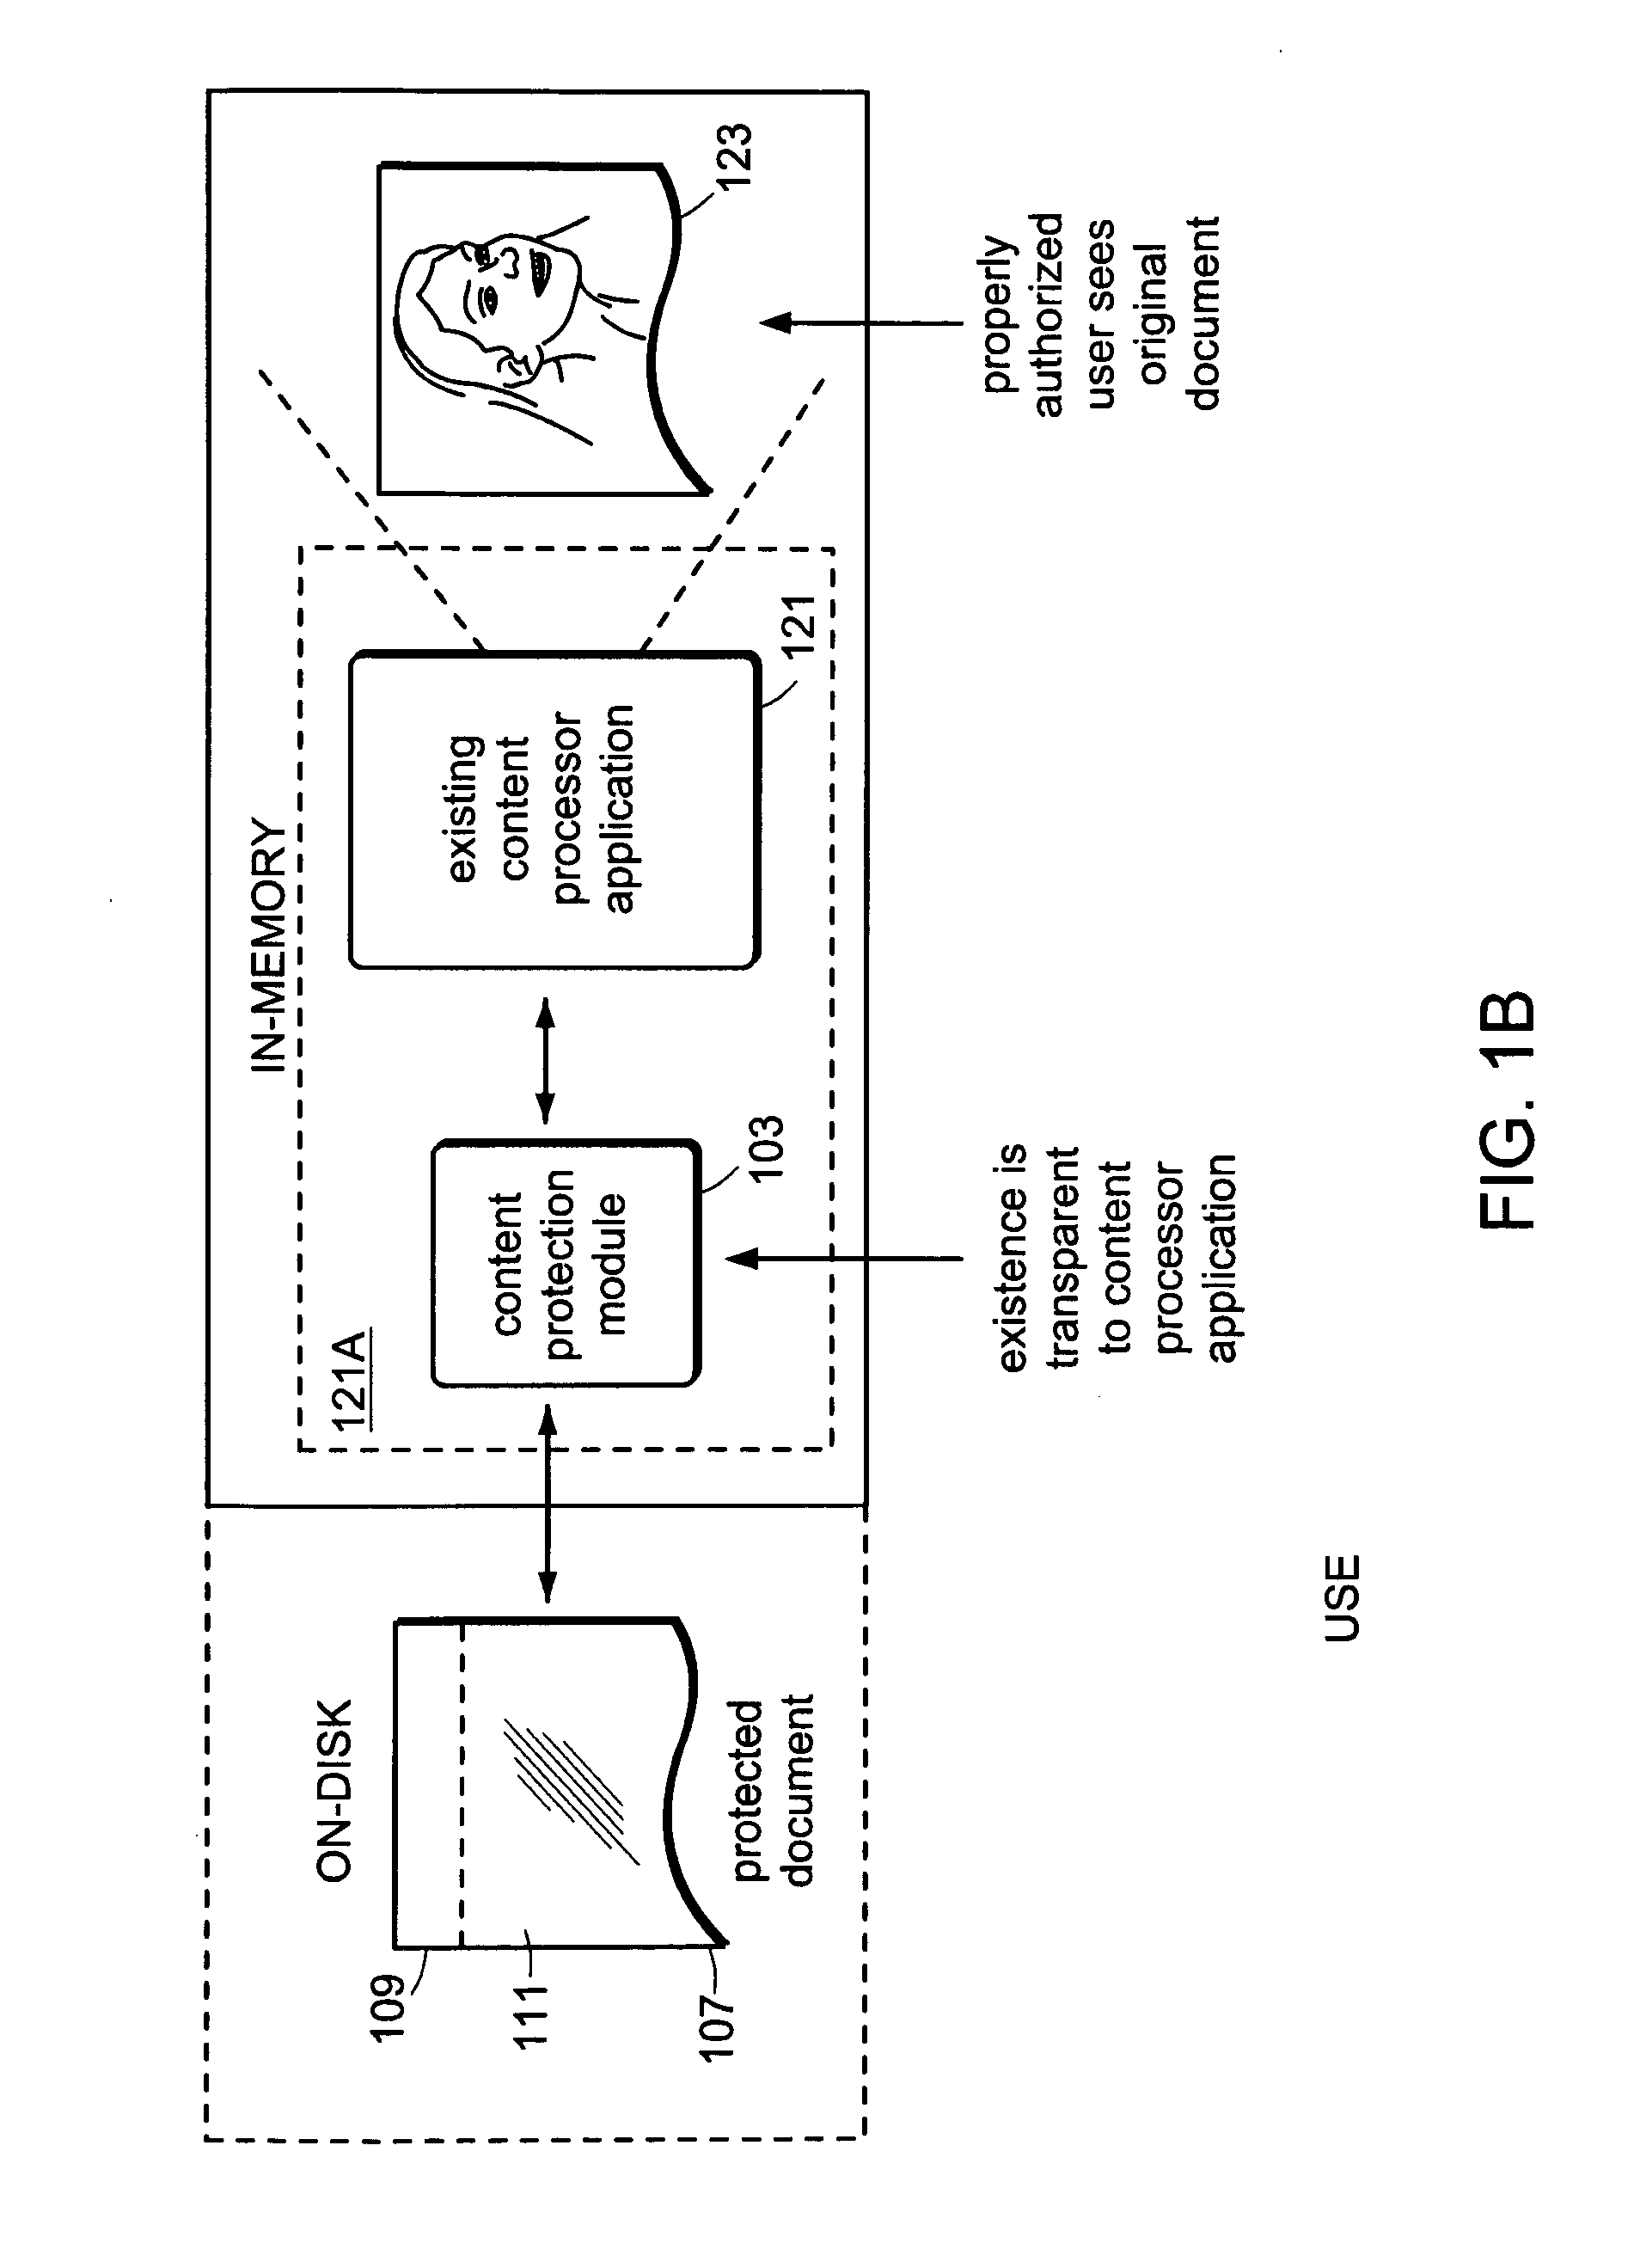 Method for protecting digital content from unauthorized use by automatically and dynamically integrating a content-protection agent